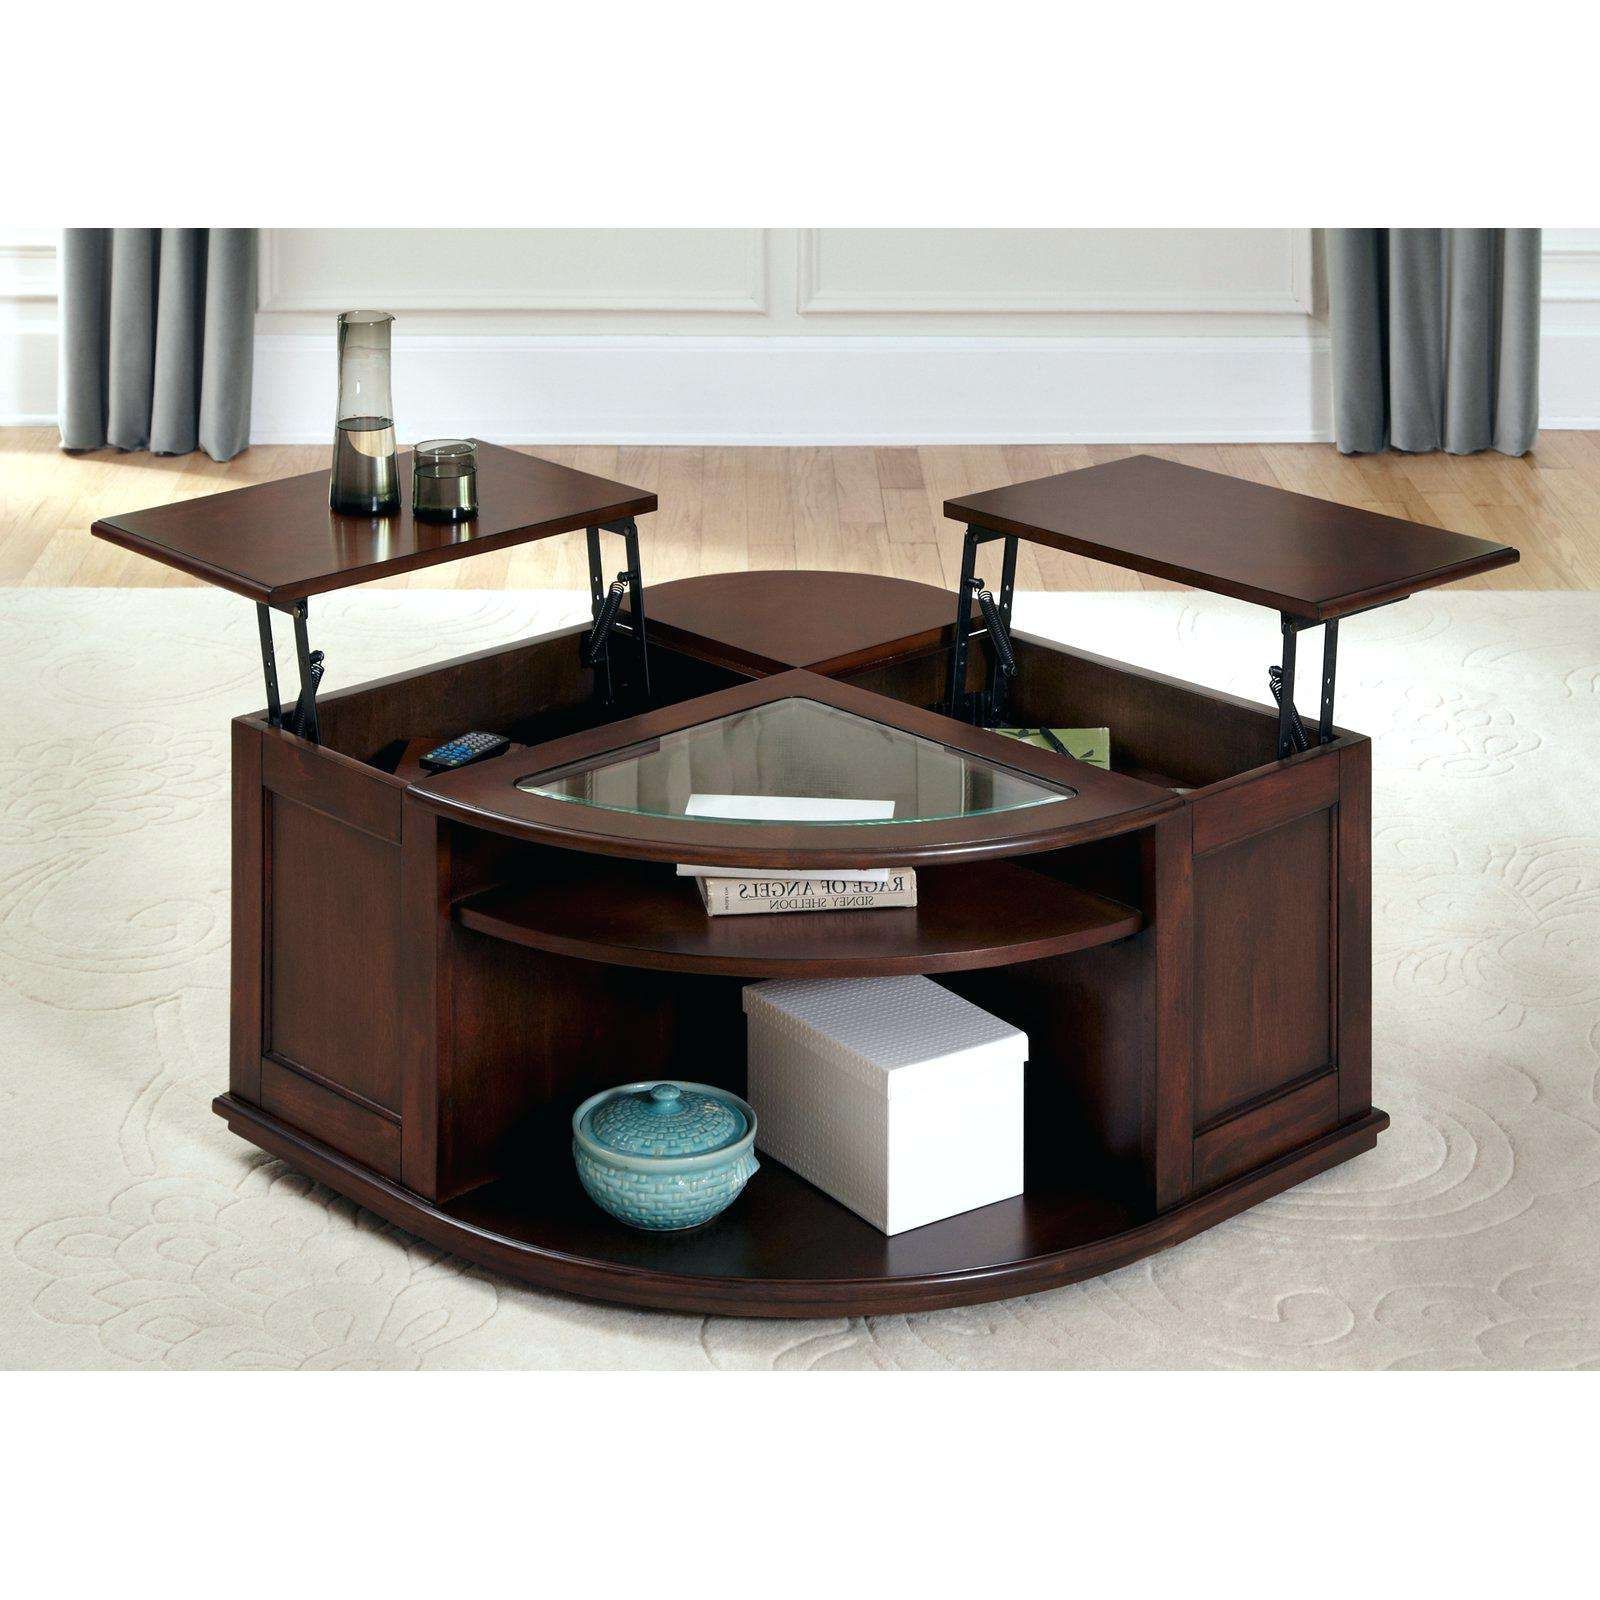 Coffee Tables : White Modern Lift Top Coffee Table Double Small In Best And Newest Opens Up Coffee Tables (View 12 of 20)